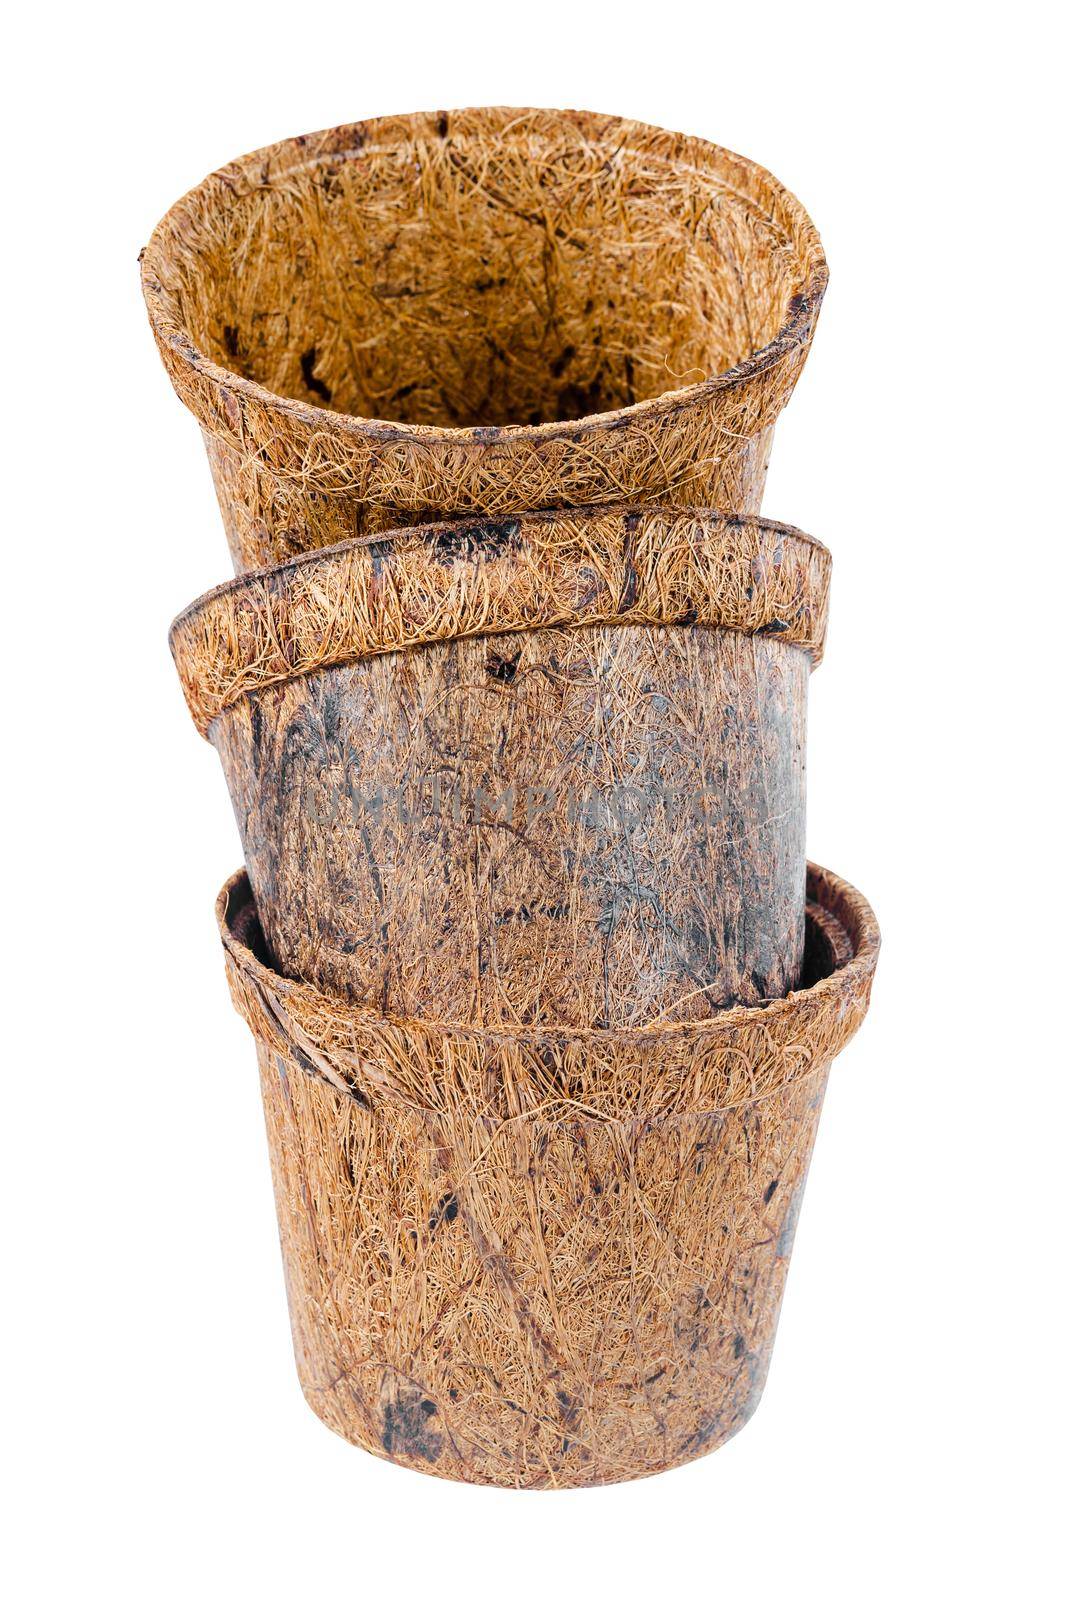 Flower pot, Coconut fiber plant isolated on a white background clipping path. by Gamjai